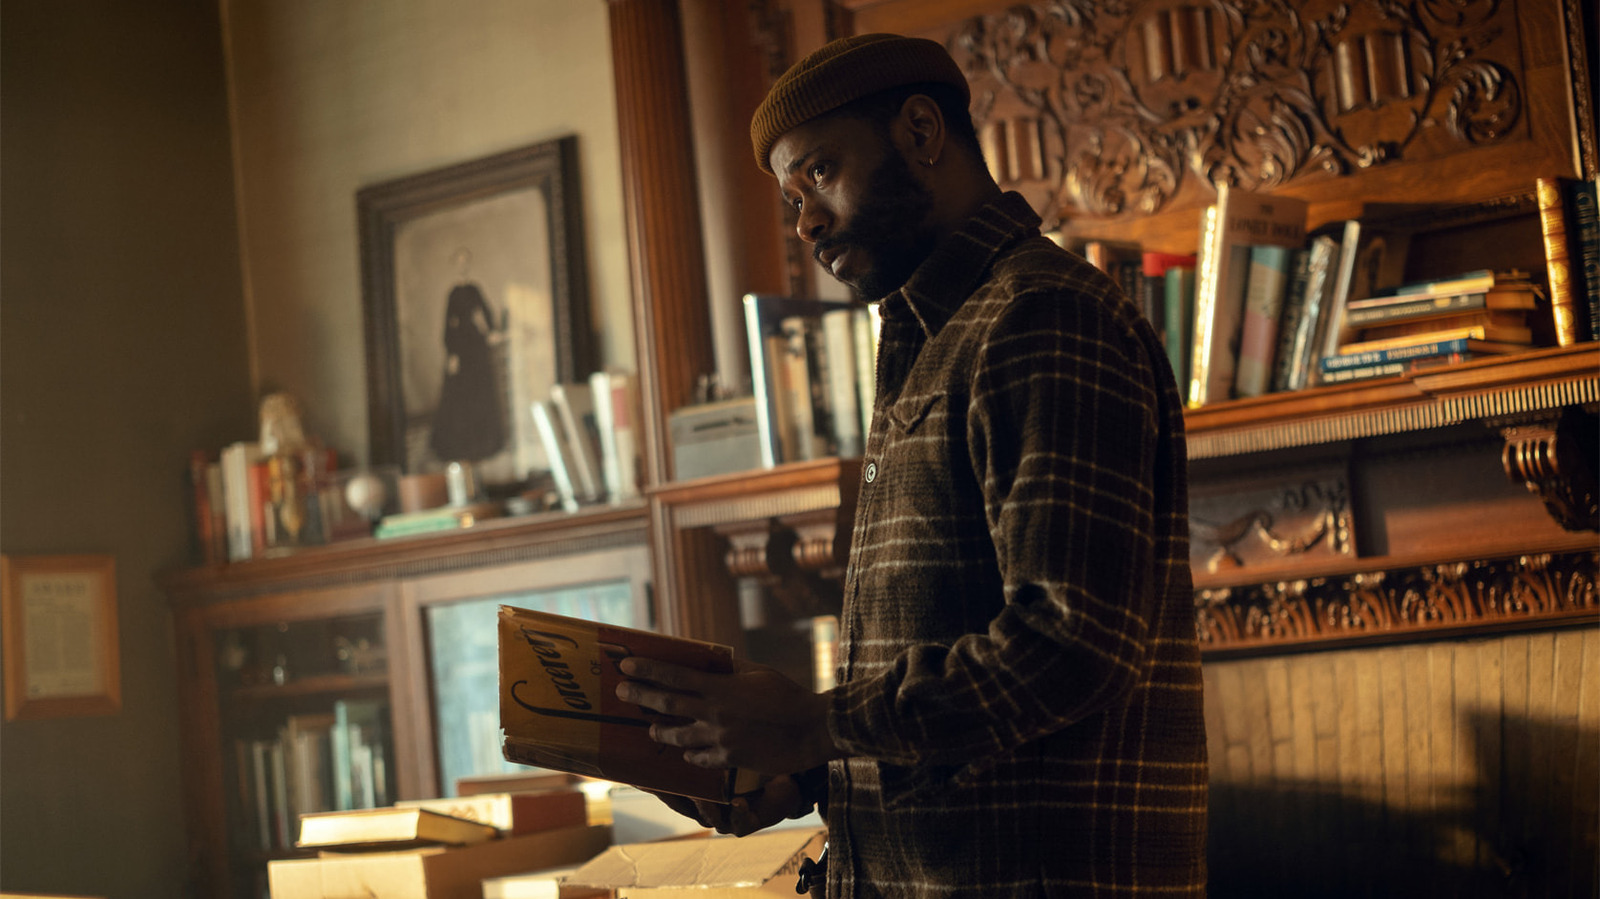 The Changeling Trailer: LaKeith Stanfield Stars In The Haunting Fairytale Series